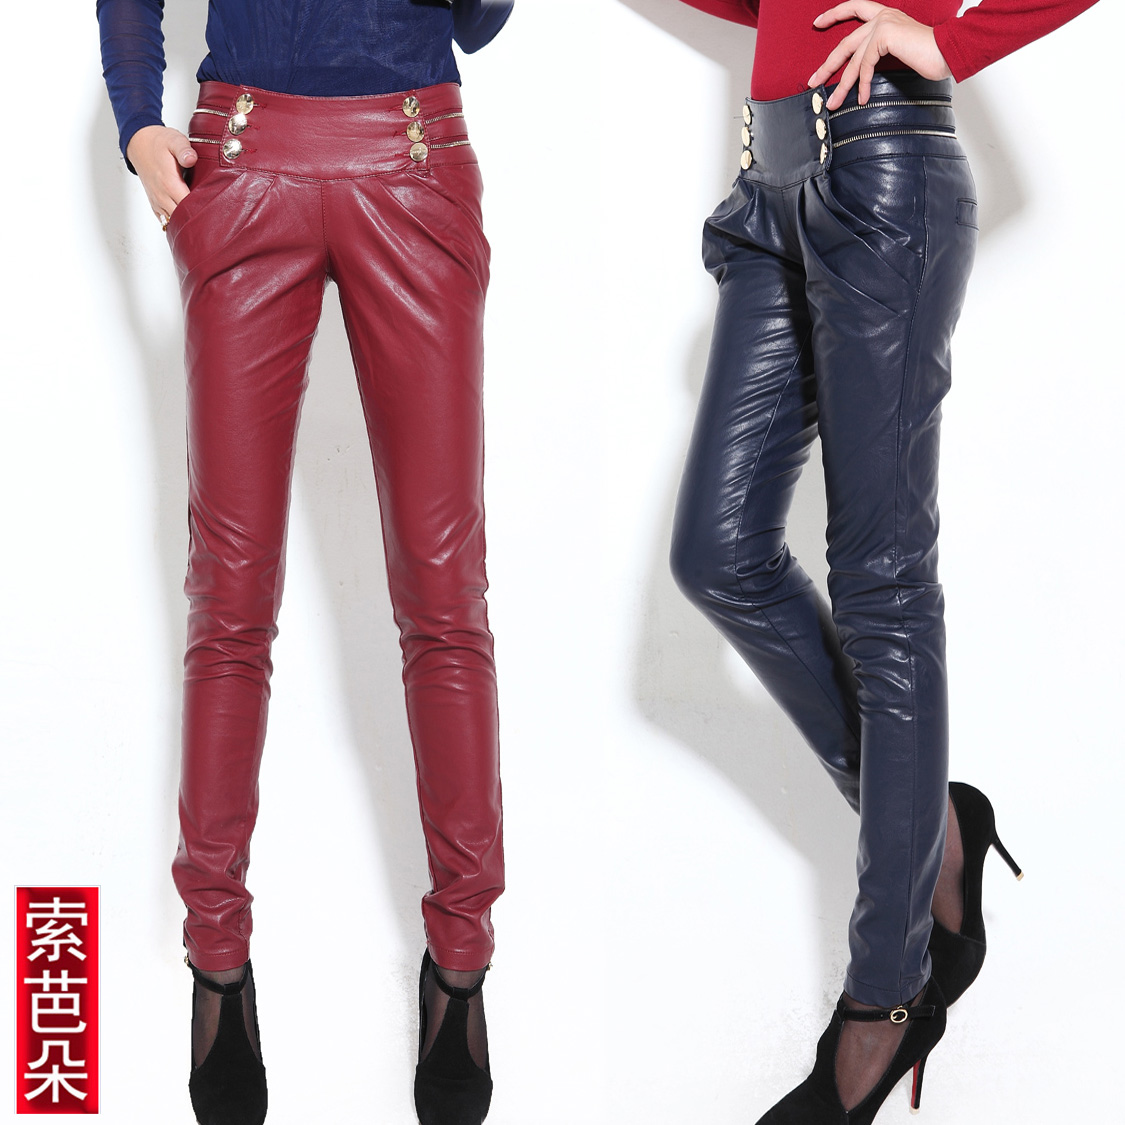 Boot cut jeans pants autumn and winter new arrival skinny pants legging PU trousers pencil pants casual pants leather pants